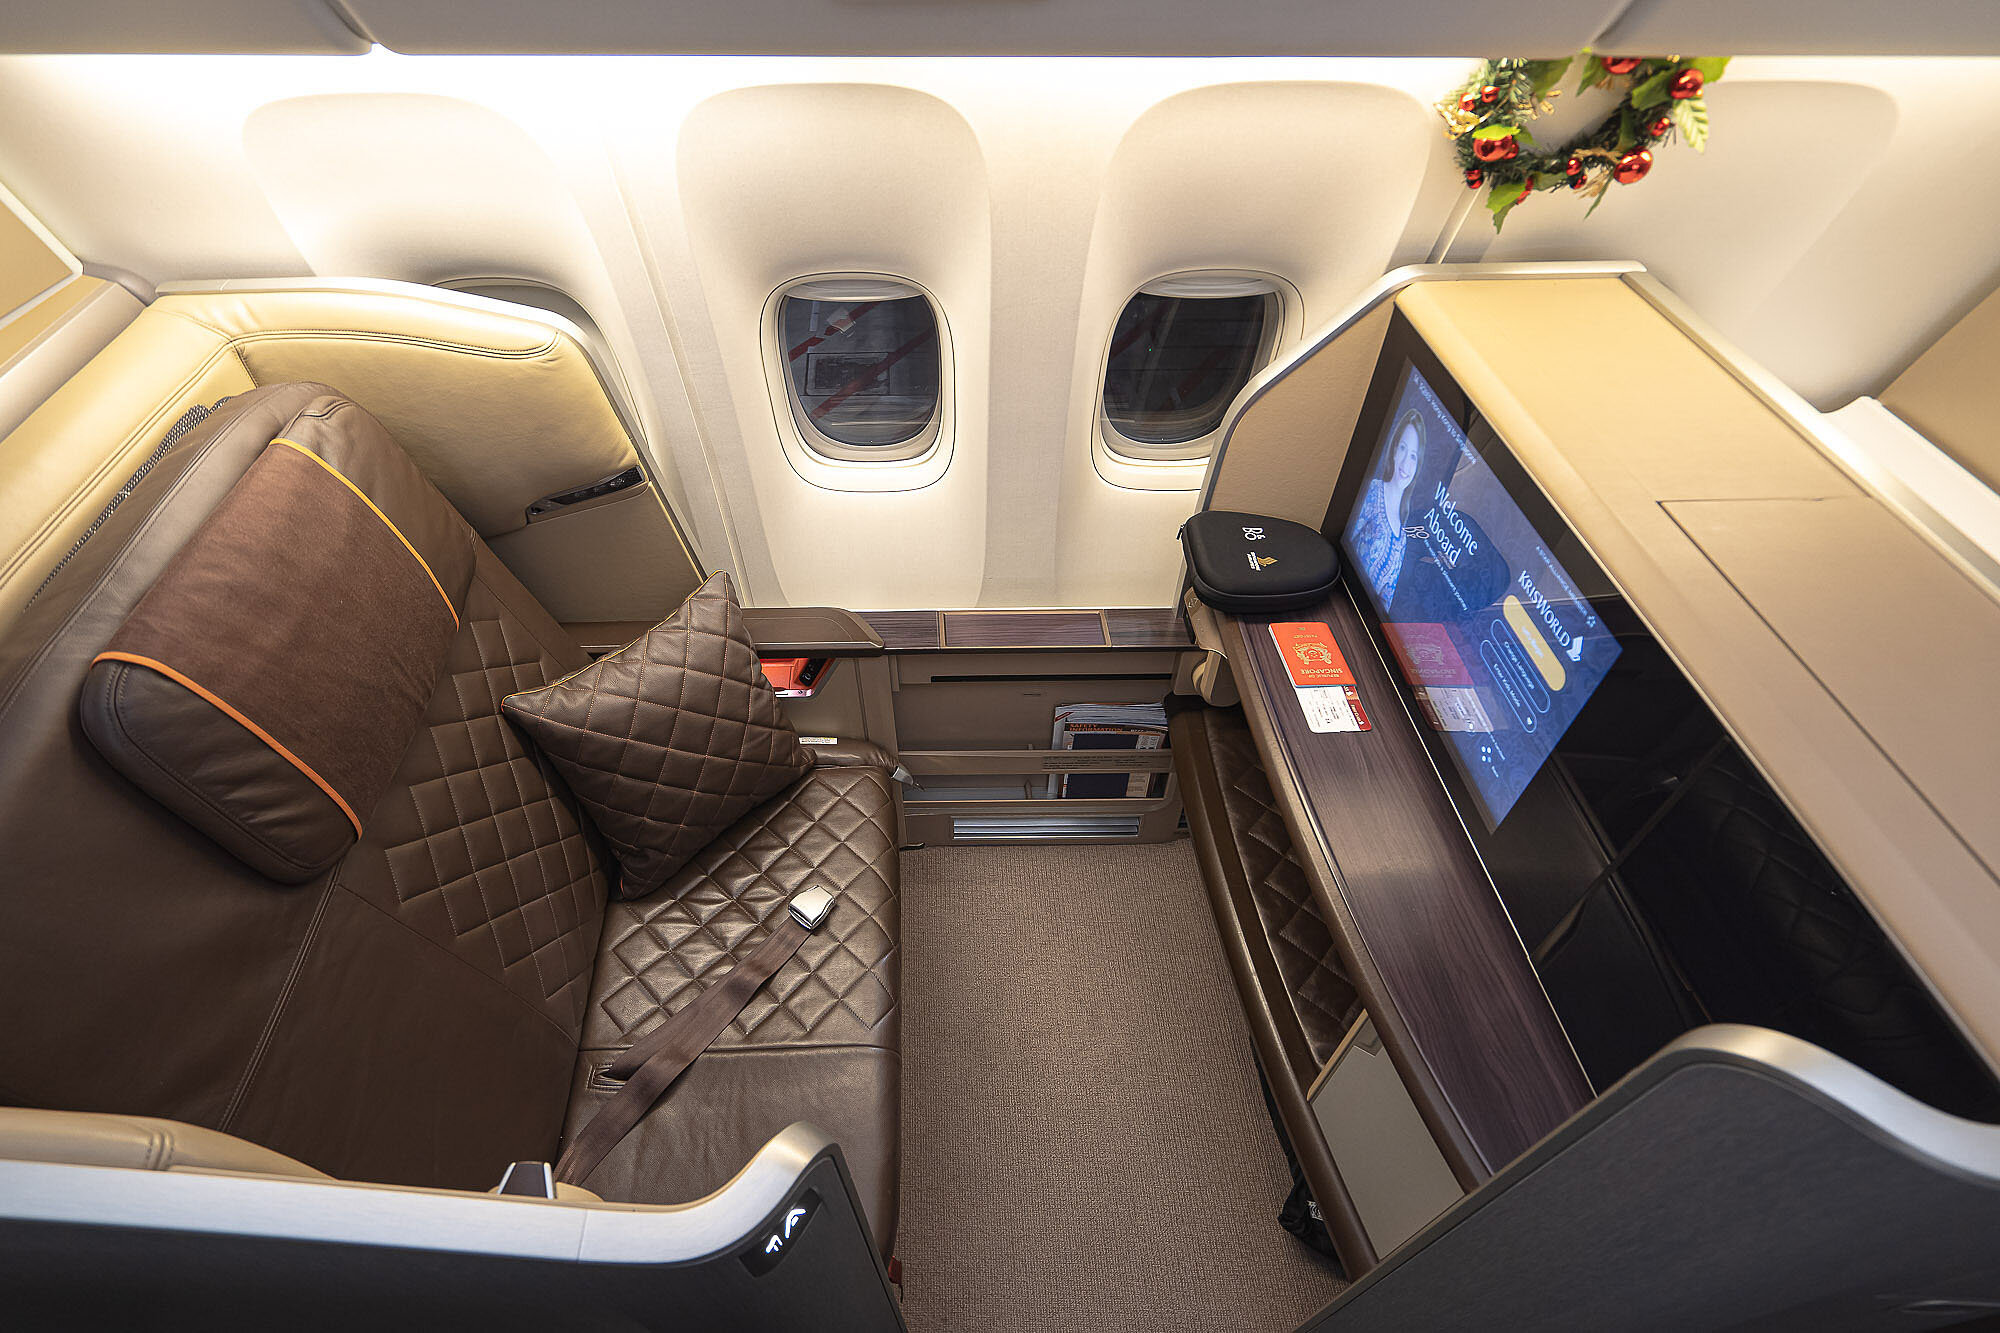 Singapore Airlines 2013 First Class